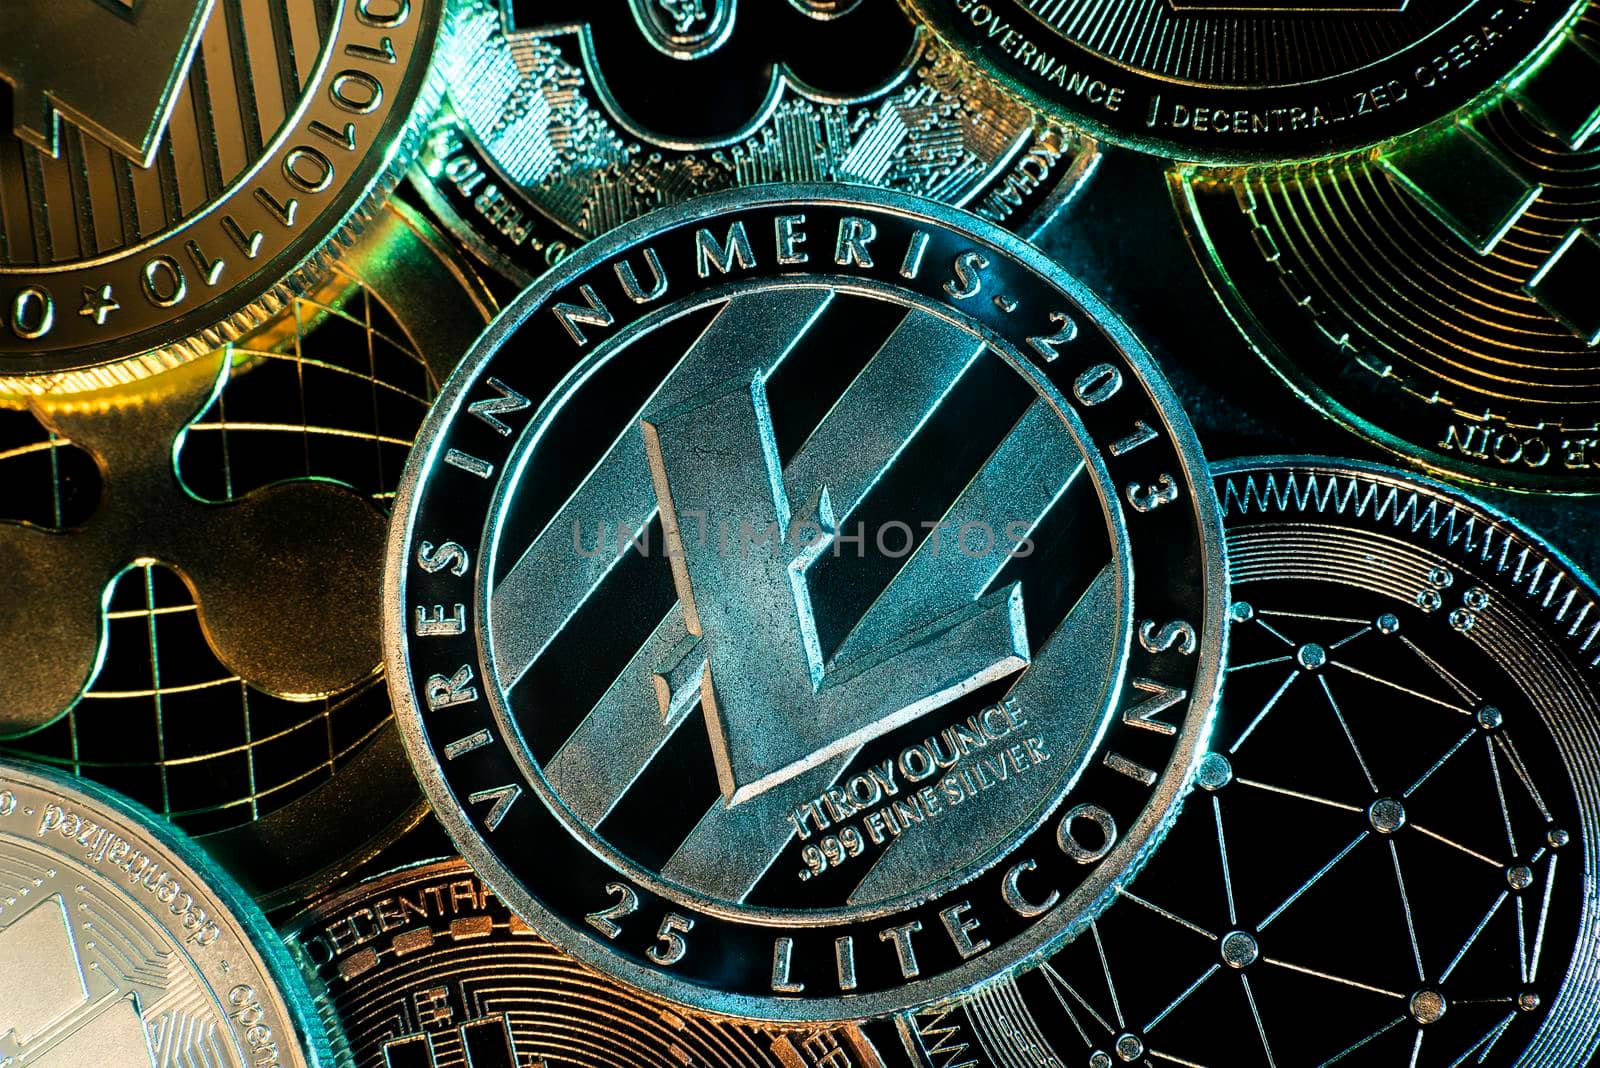 Horizontal view of cryptocurrency tokens, including Litecoin, Bitcoin, dogecoin, and ethererum saw from above on a black background. flat lay by avirozen